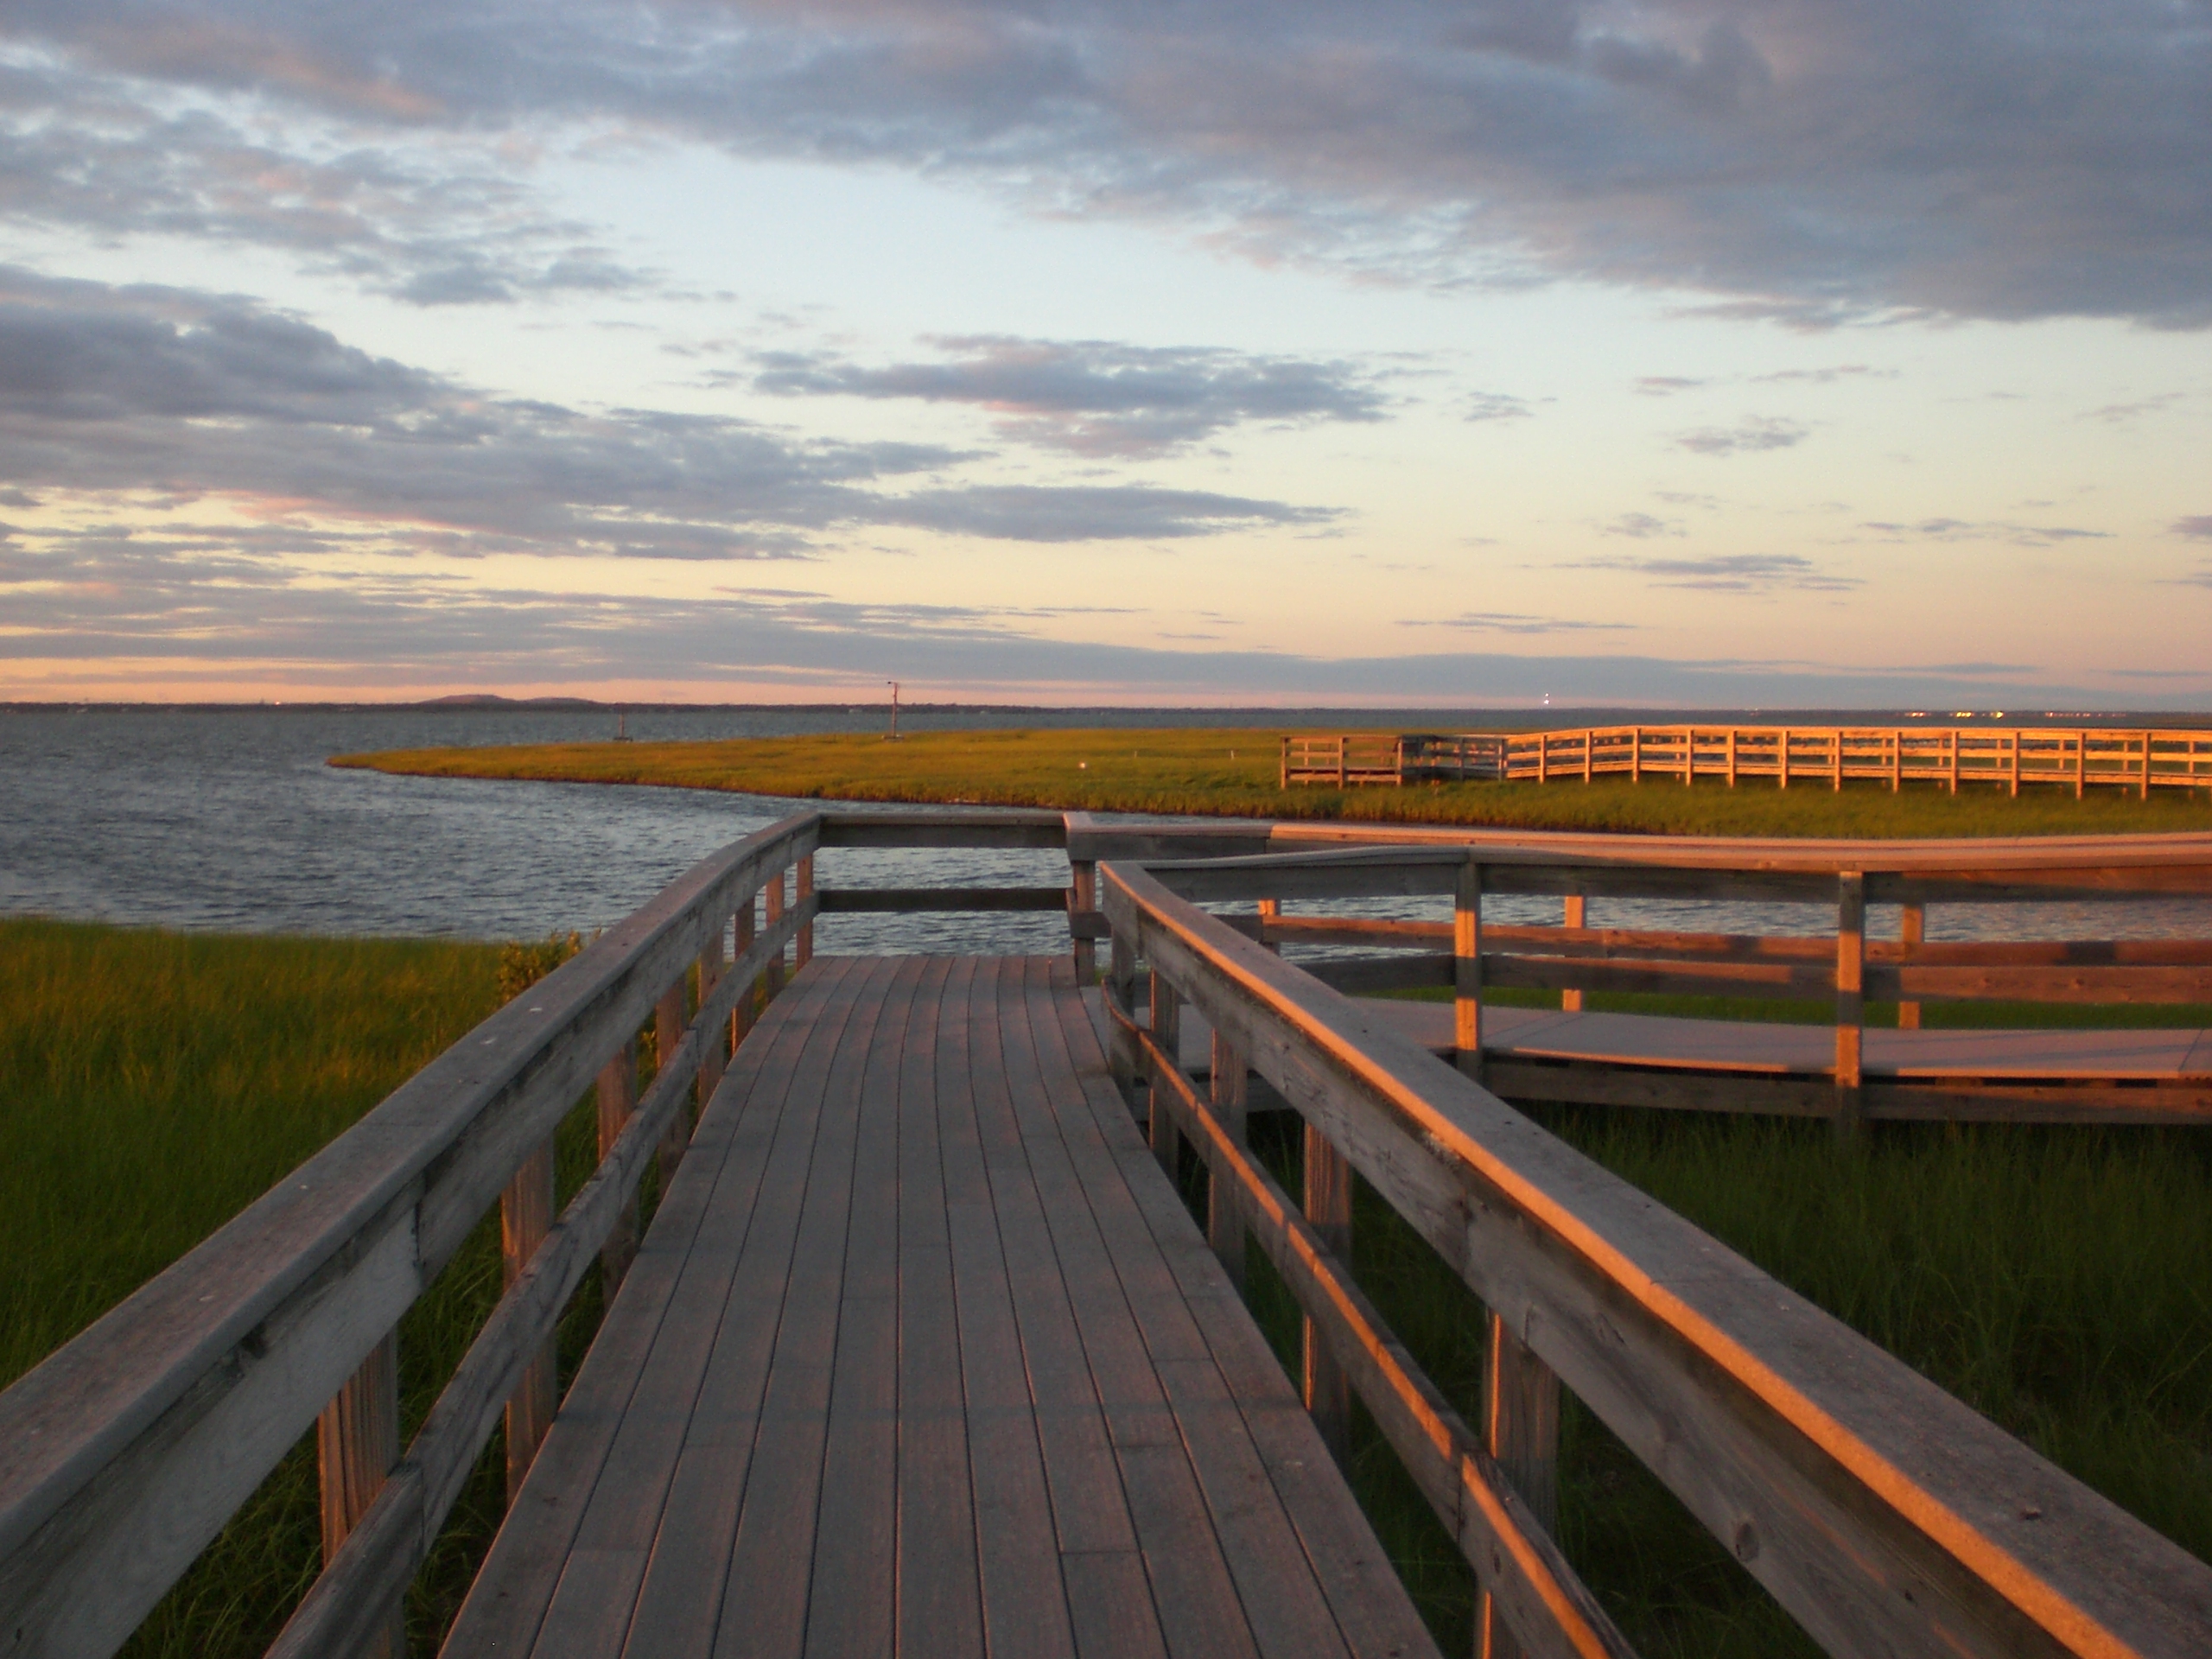 Photo of a dock at sunset on Fire Island.